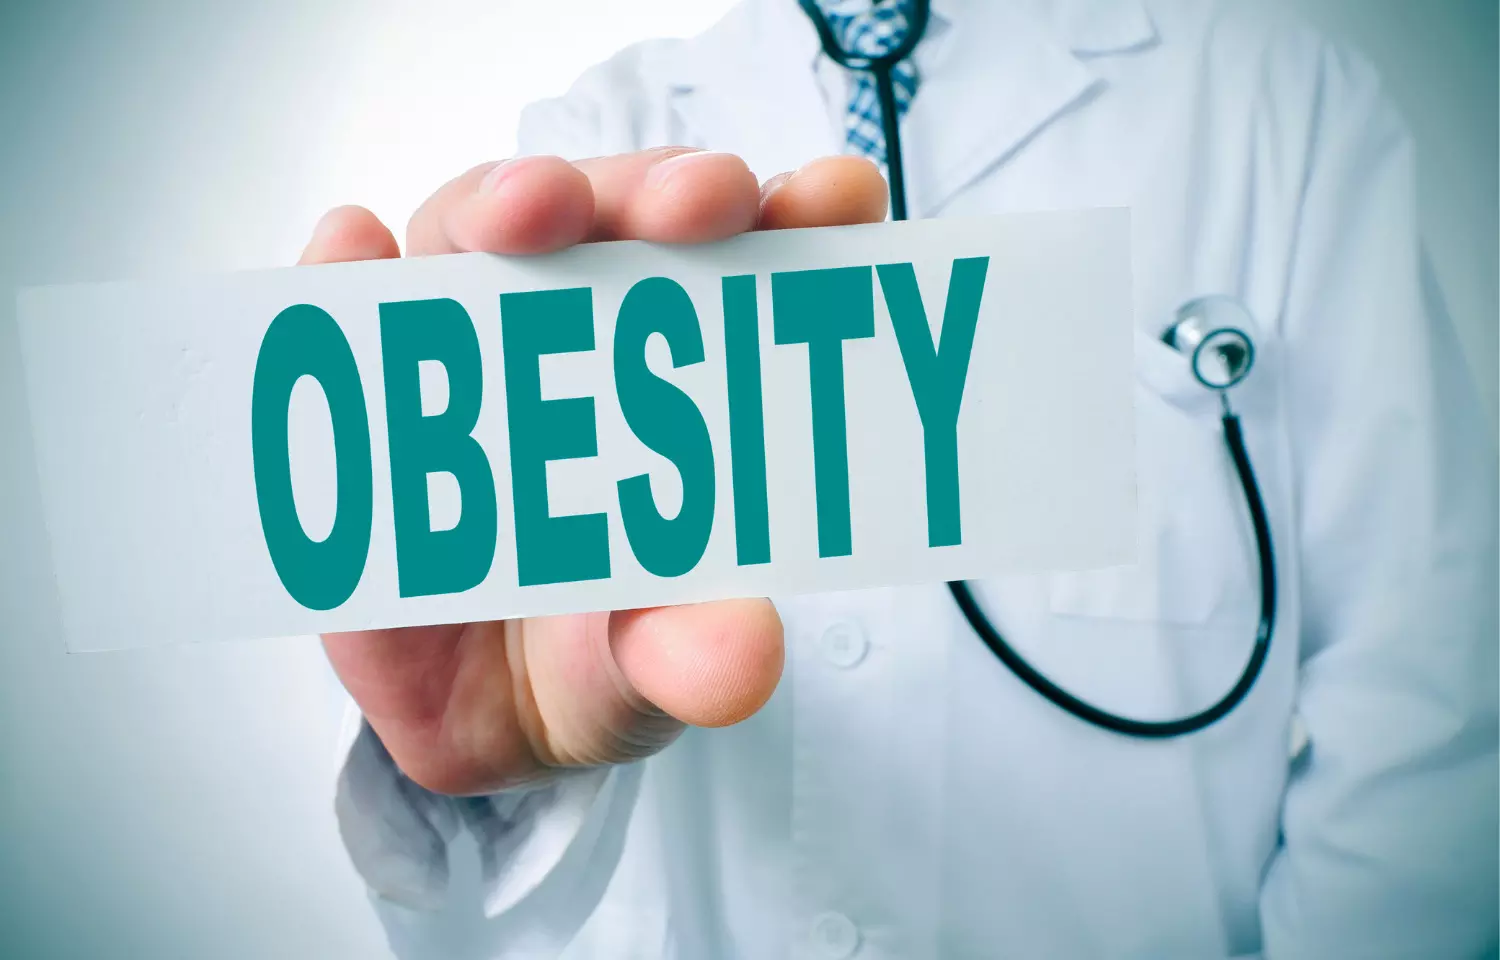 Weights may be effective weapons in battle against obesity